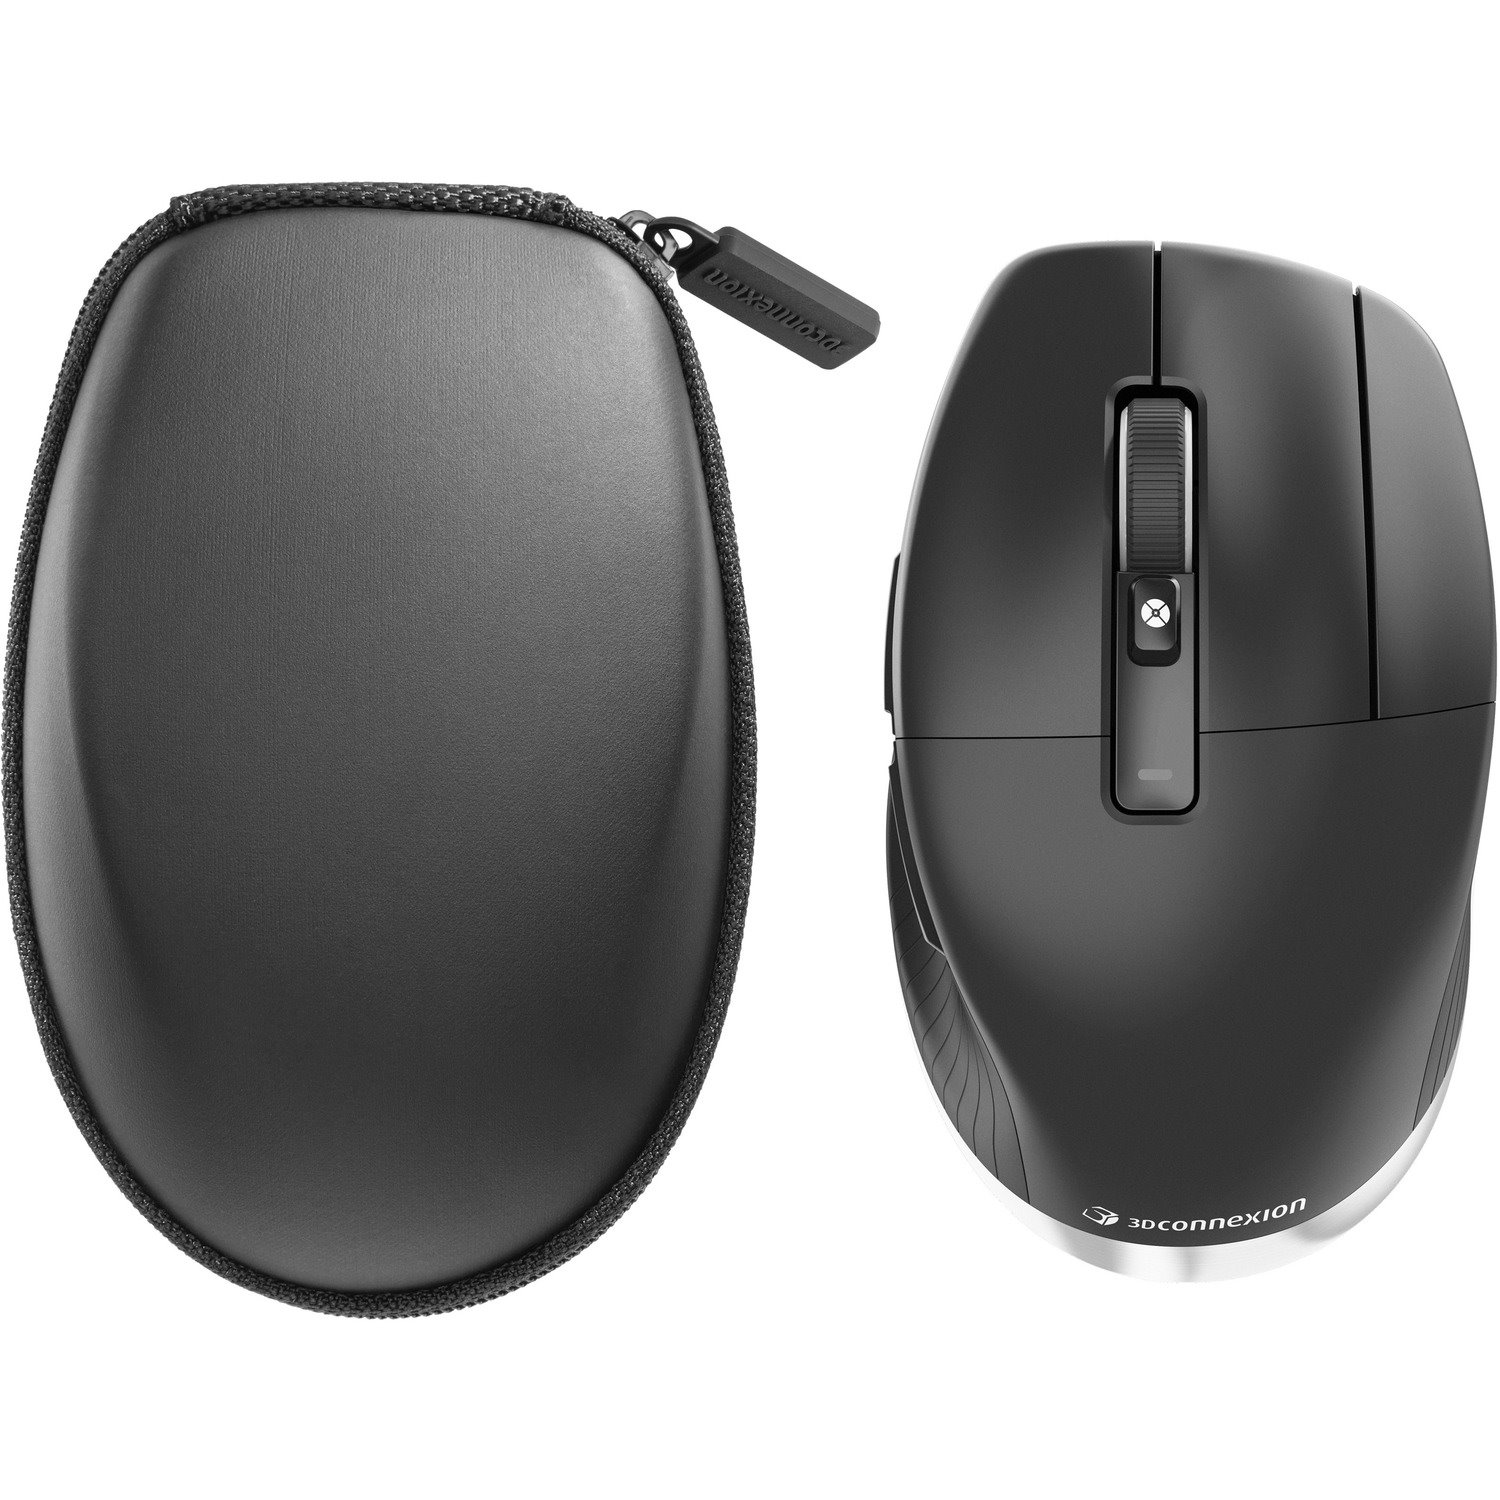 3Dconnexion CadMouse Mouse - Bluetooth/Radio Frequency - USB - Optical - 7 Button(s) - 5 Programmable Button(s)